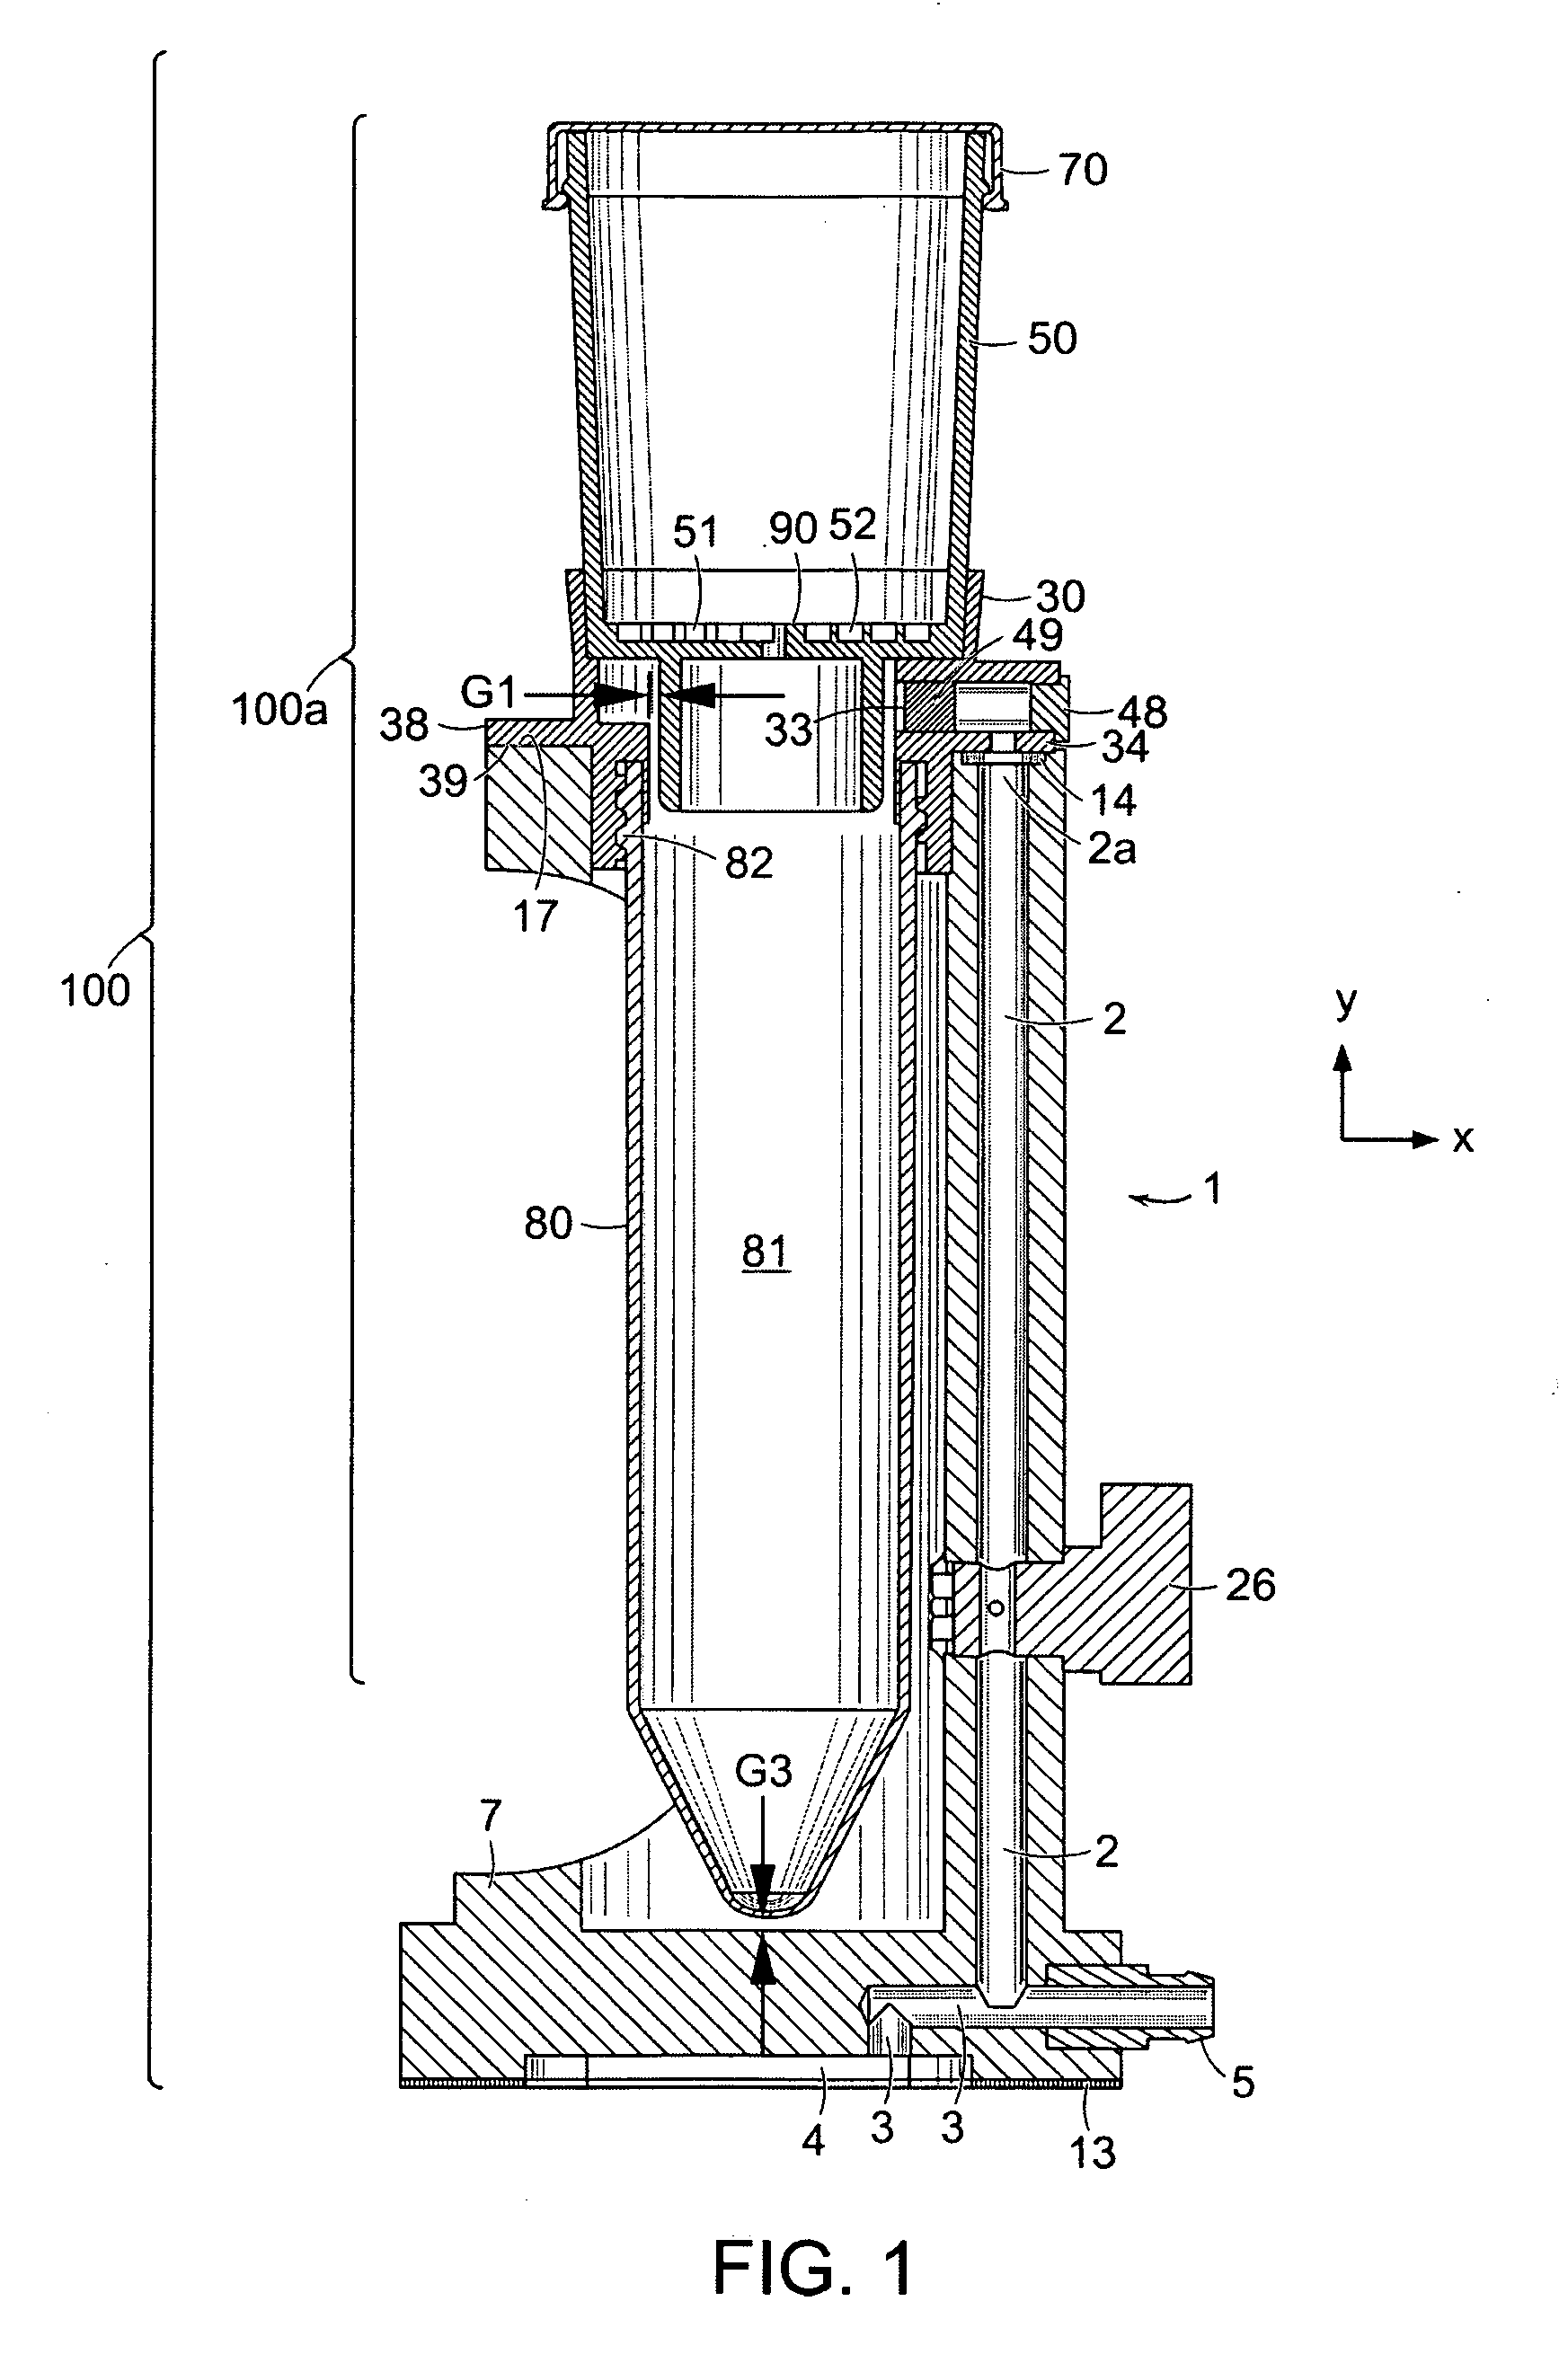 Systems, apparatus and methods for vacuum filtration